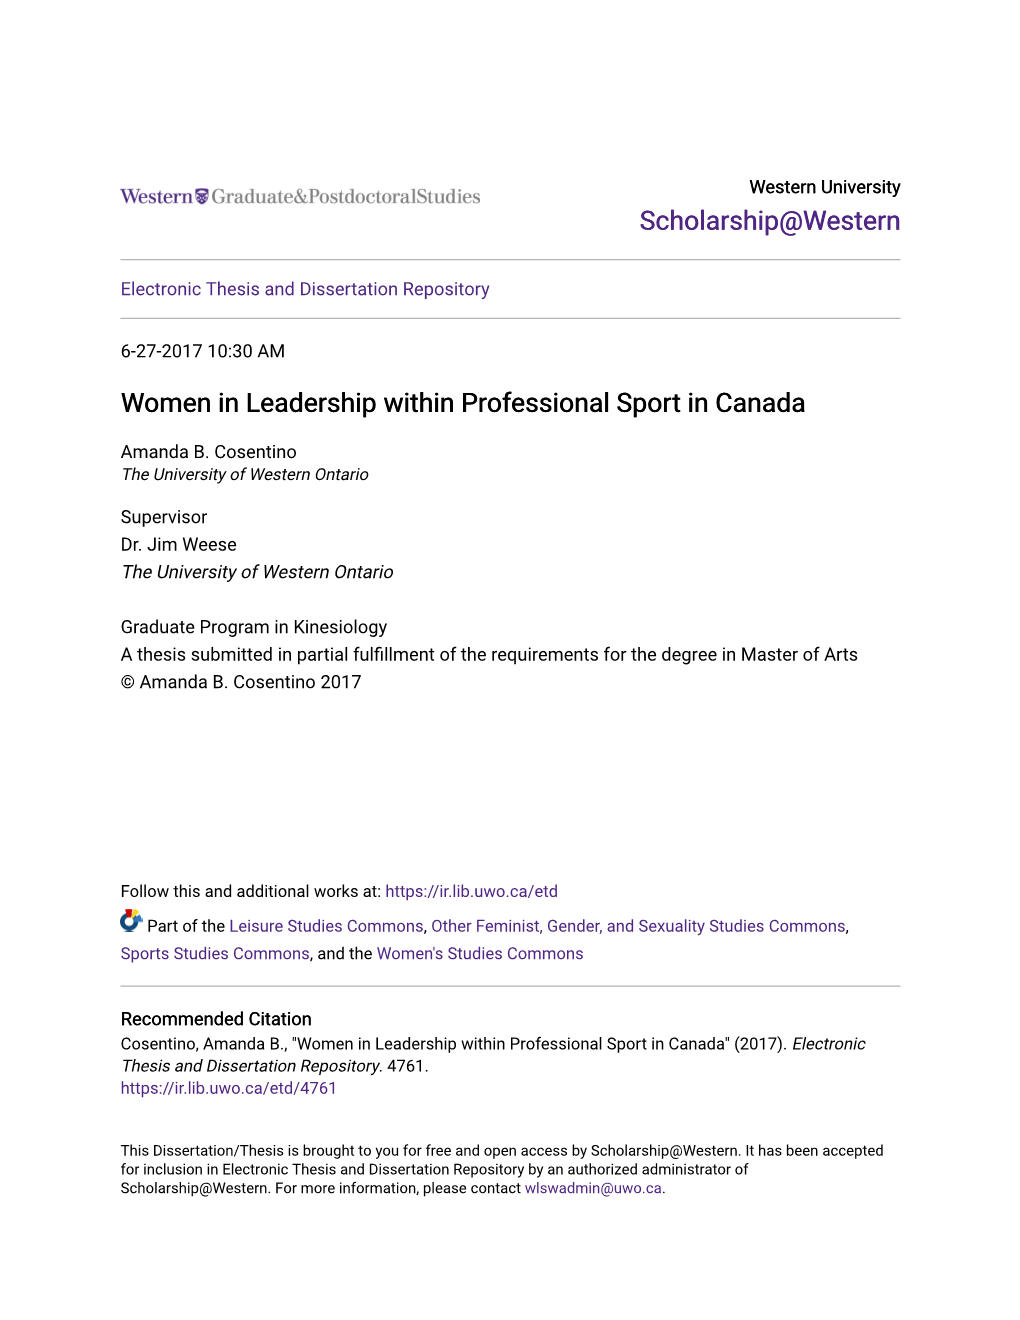 Women in Leadership Within Professional Sport in Canada